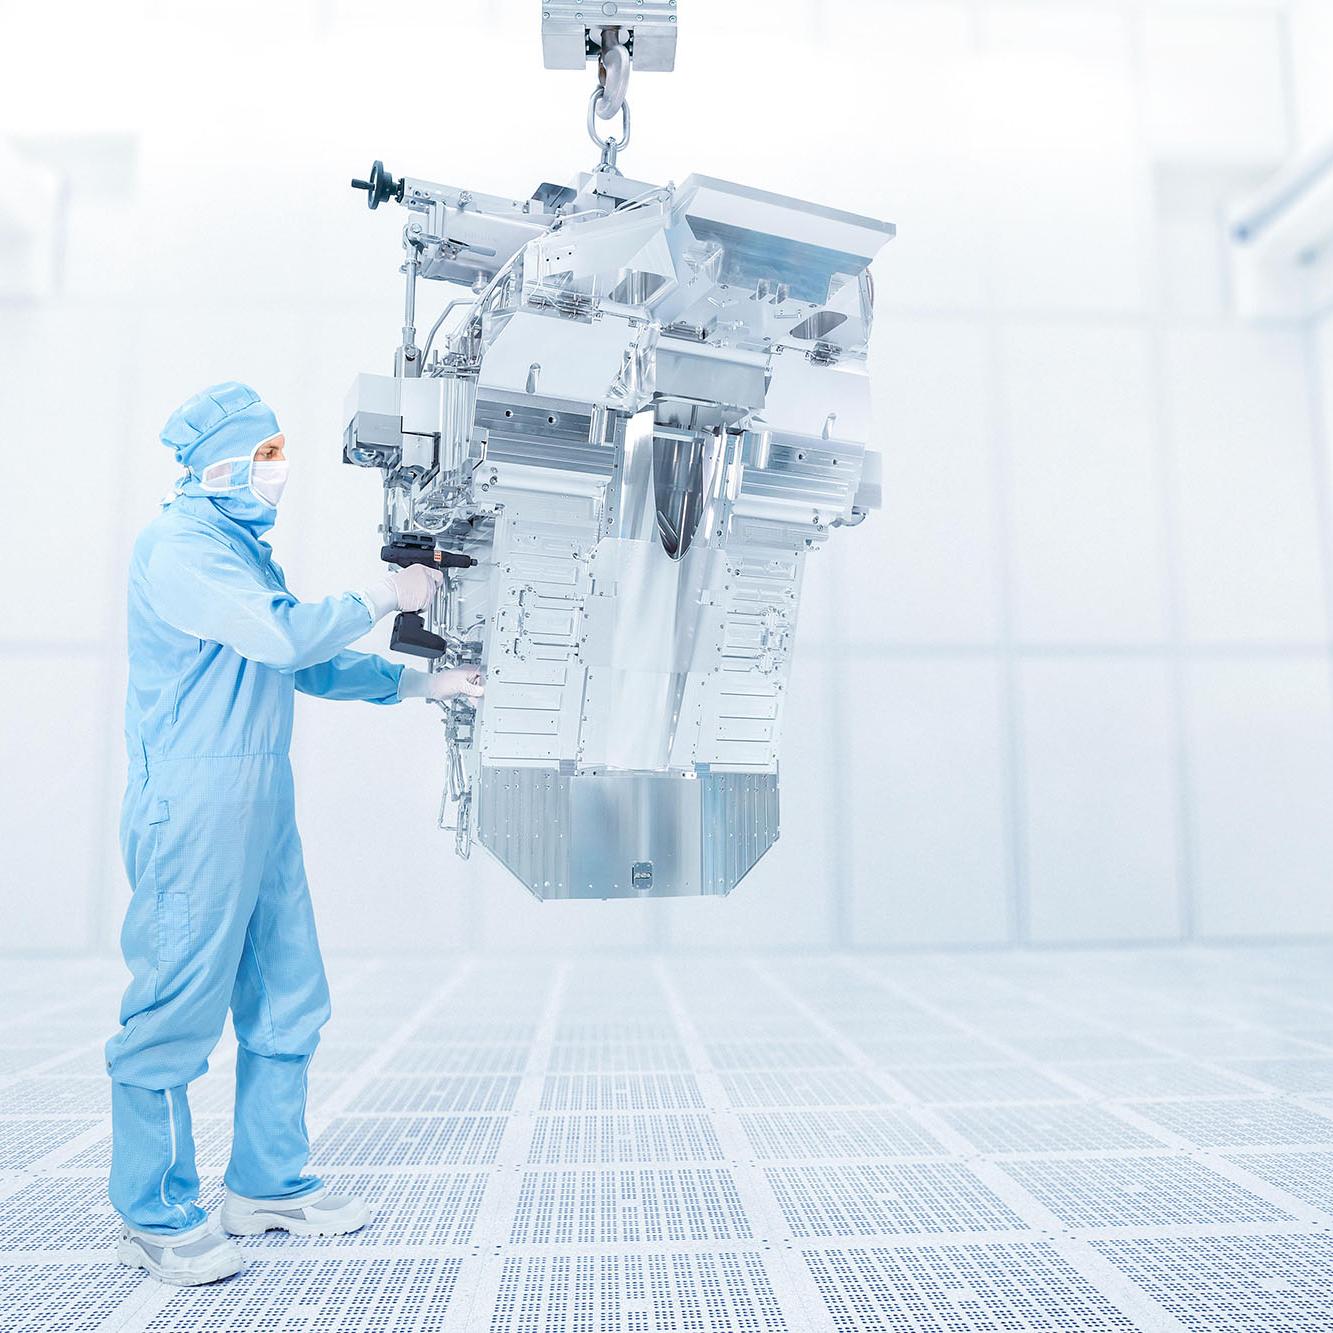 An associate of the ZEISS SMT works on a EUV system